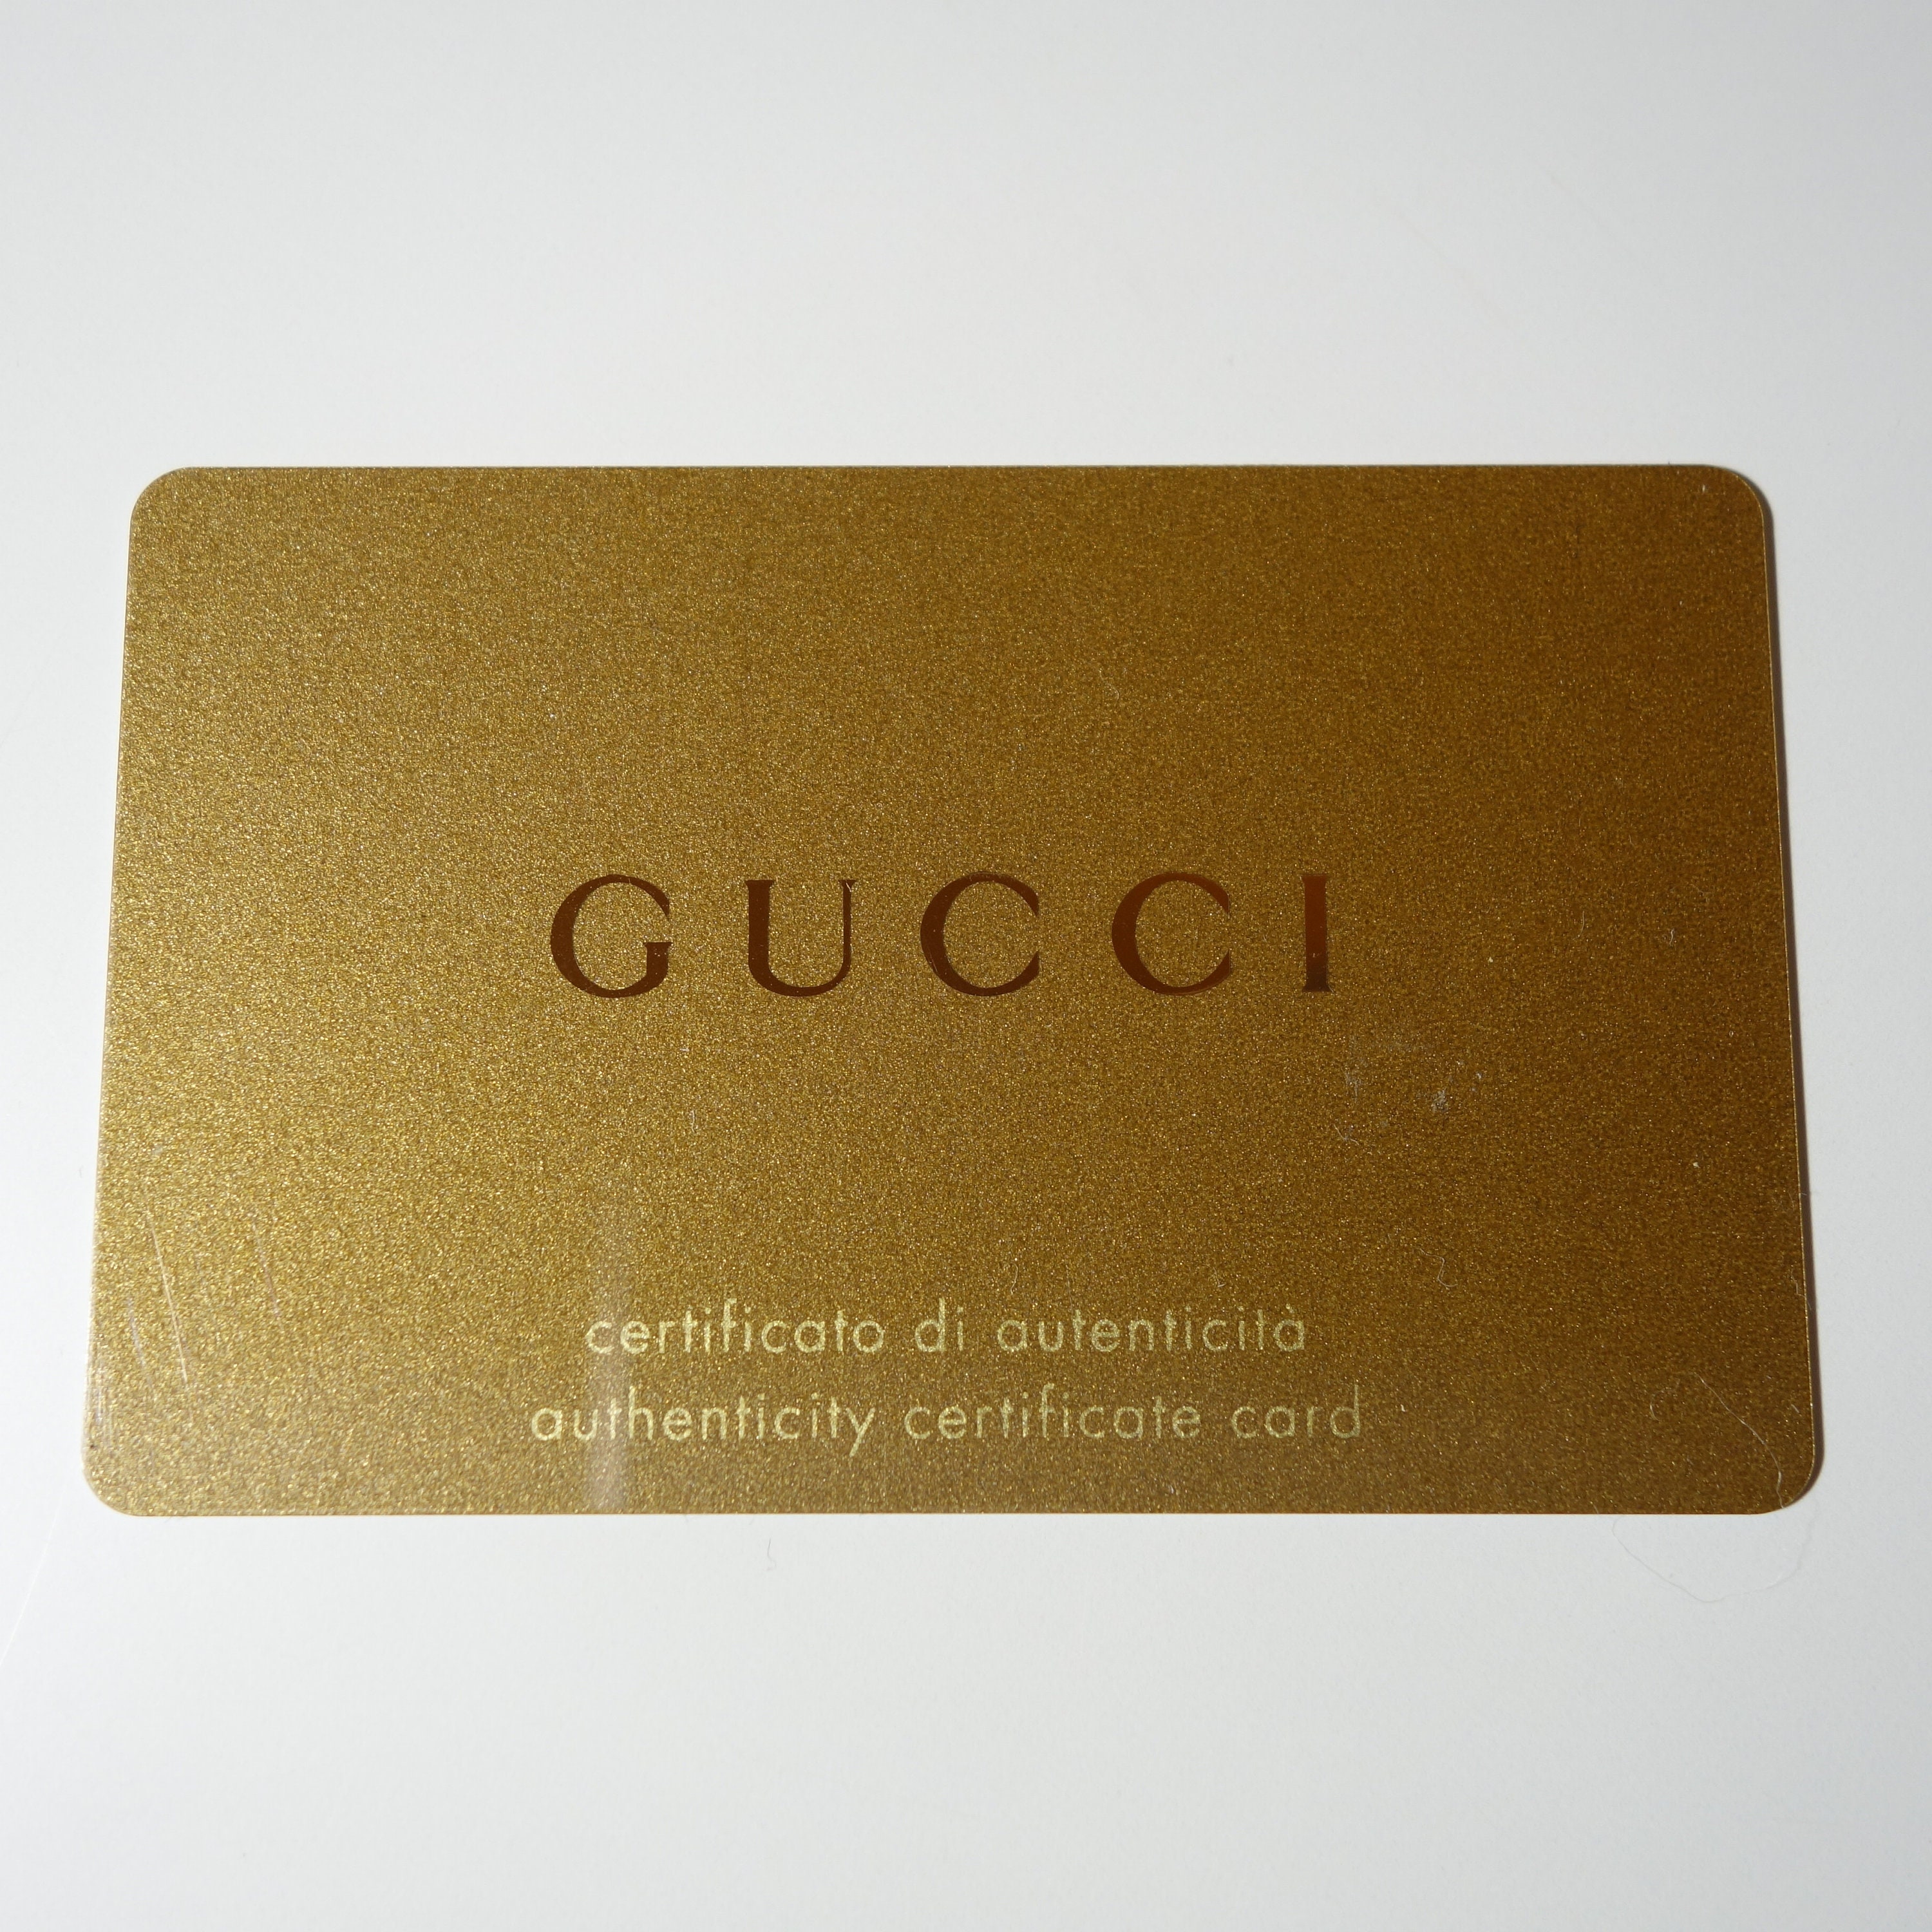 File:Gucci authenticity certificate card (2019) 02.jpg - Wikimedia Commons